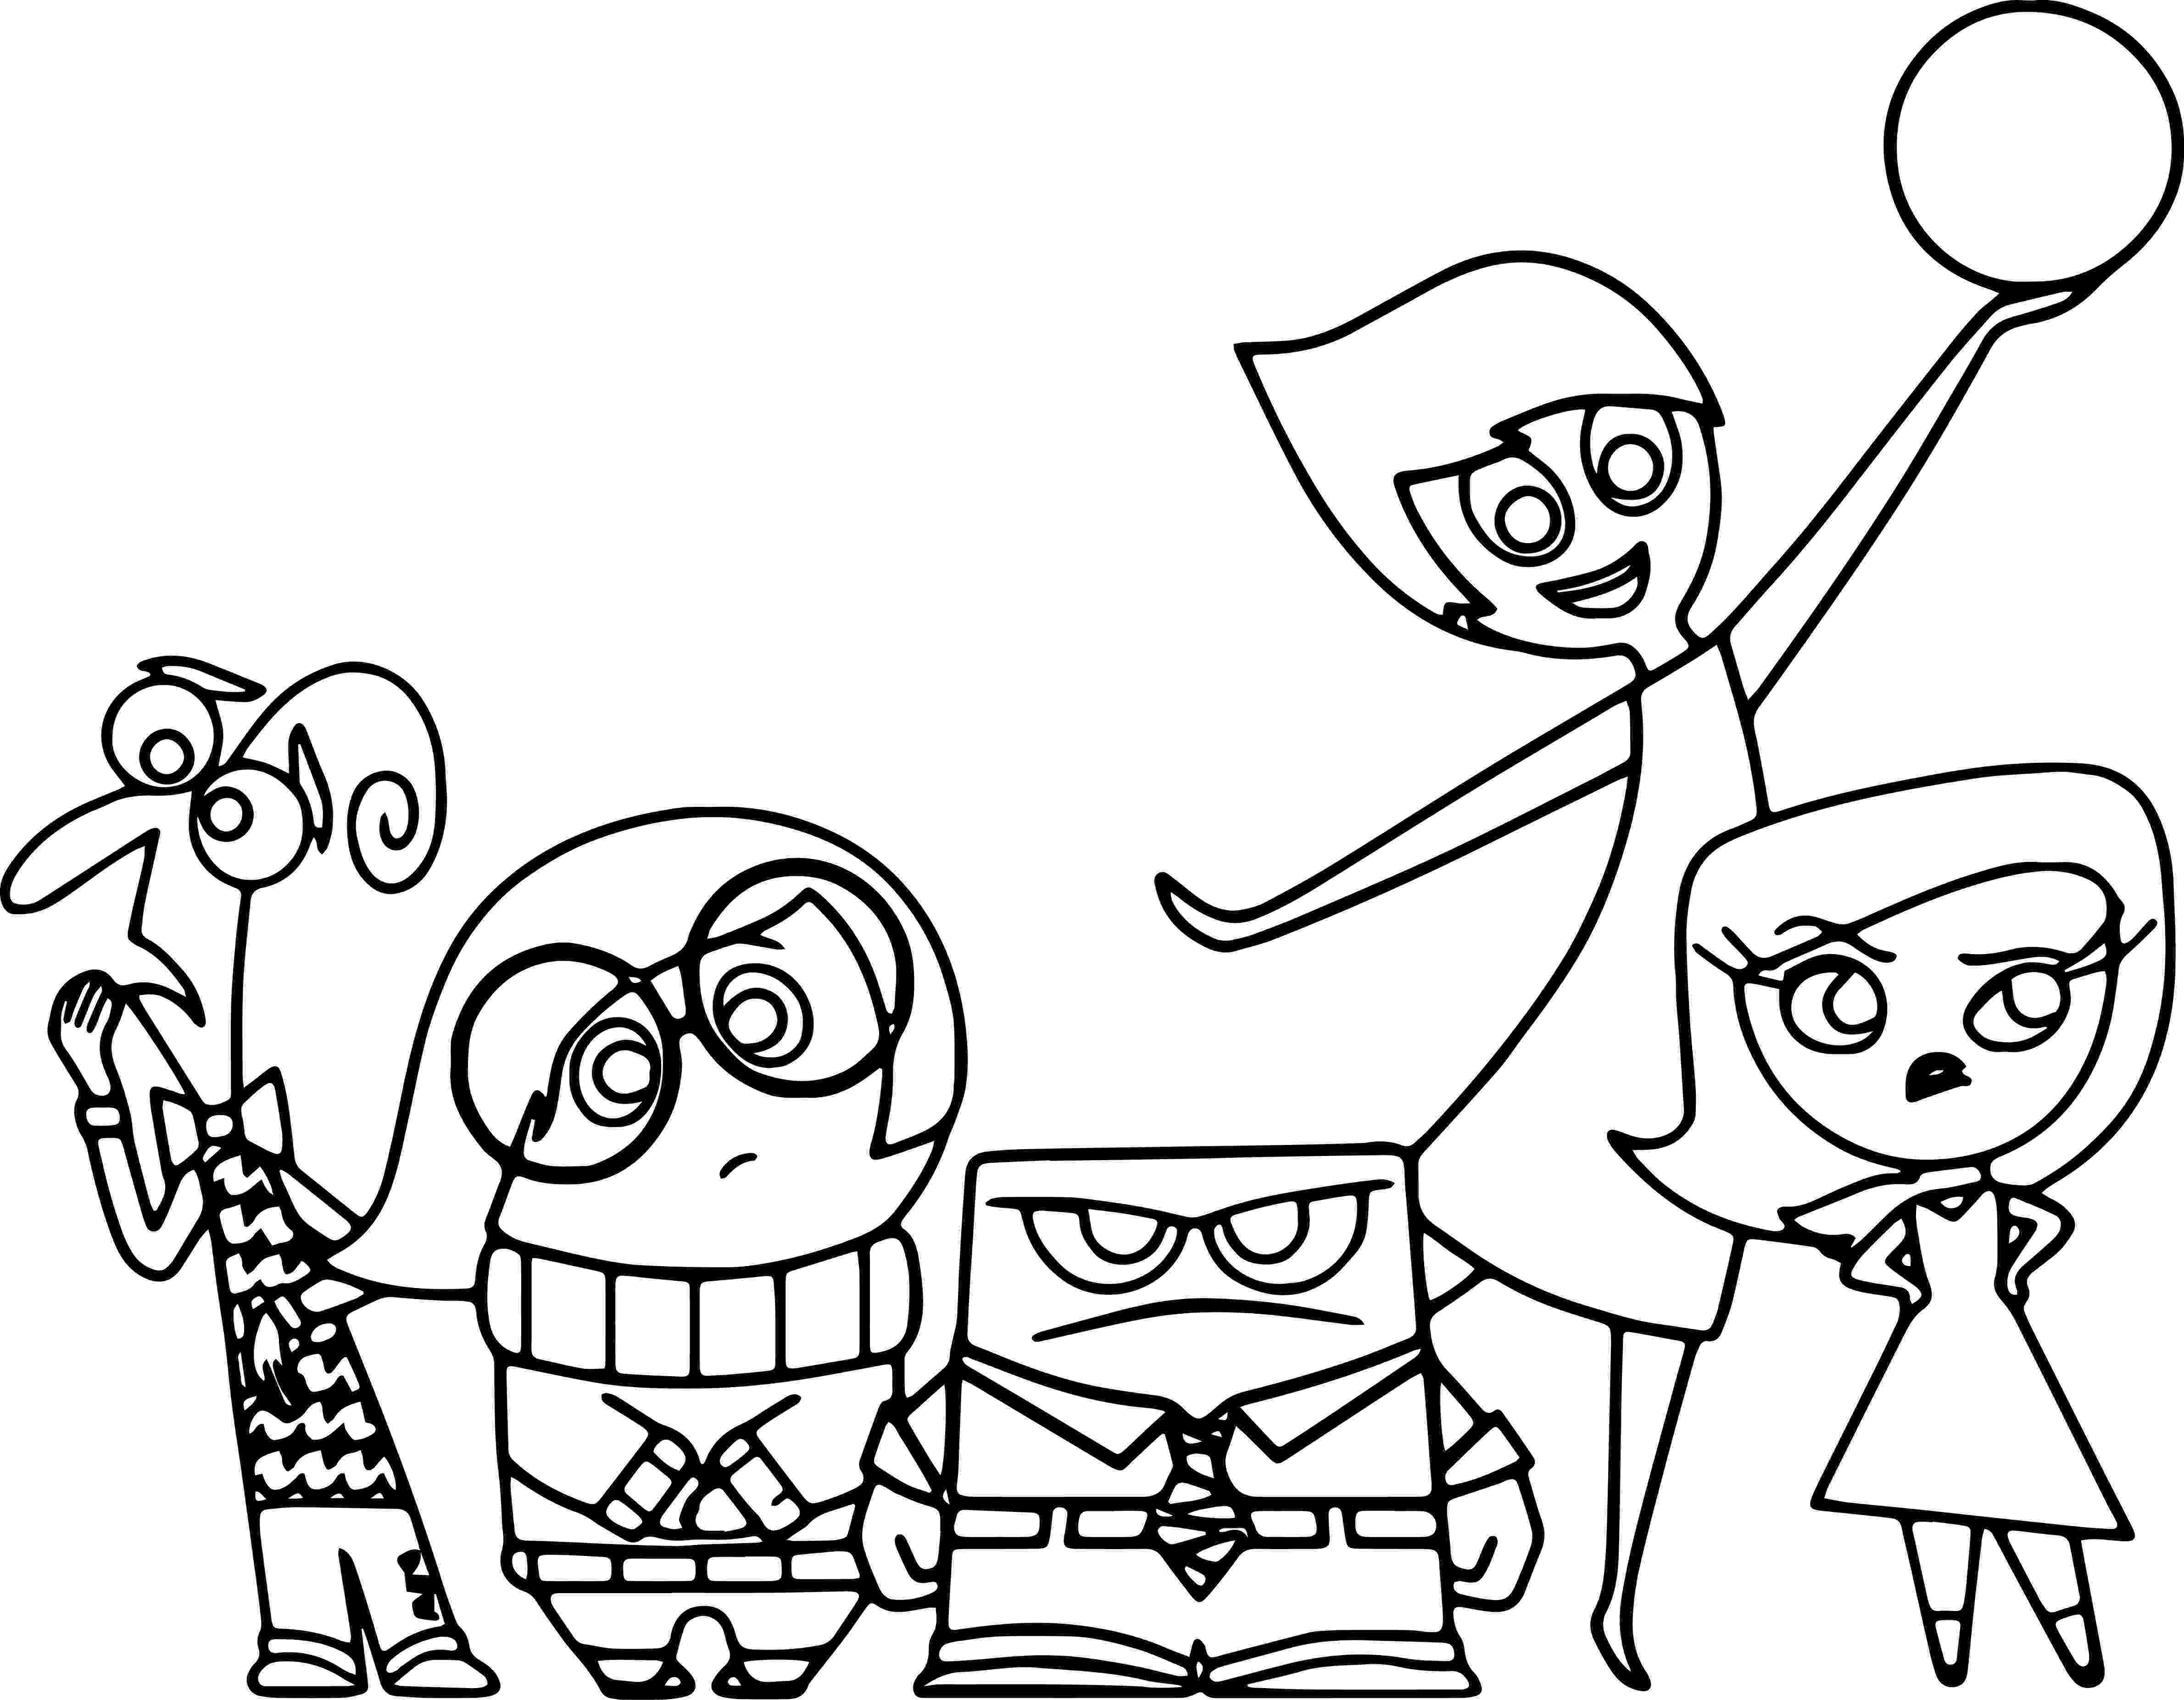 inside out coloring pages all characters inside out anger coloring page free printable coloring pages out inside characters coloring all pages 